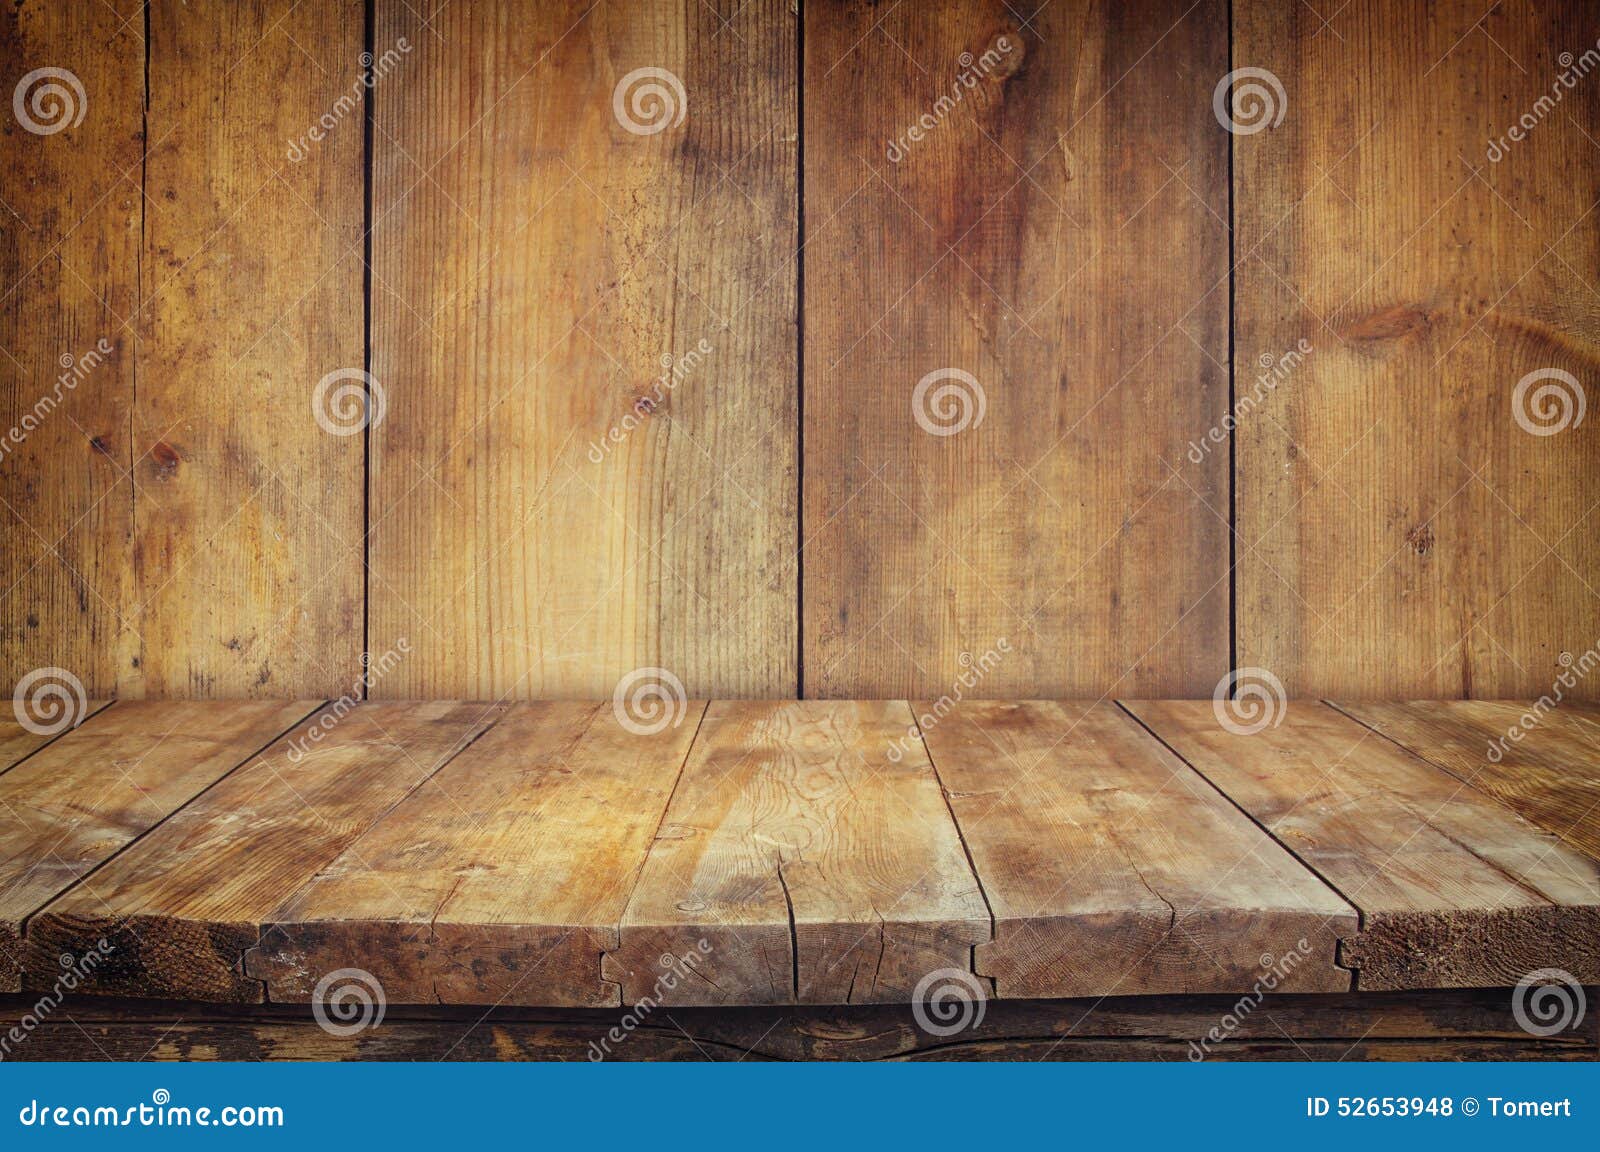 Grunge Vintage Wooden Board Table in Front of Old Wooden